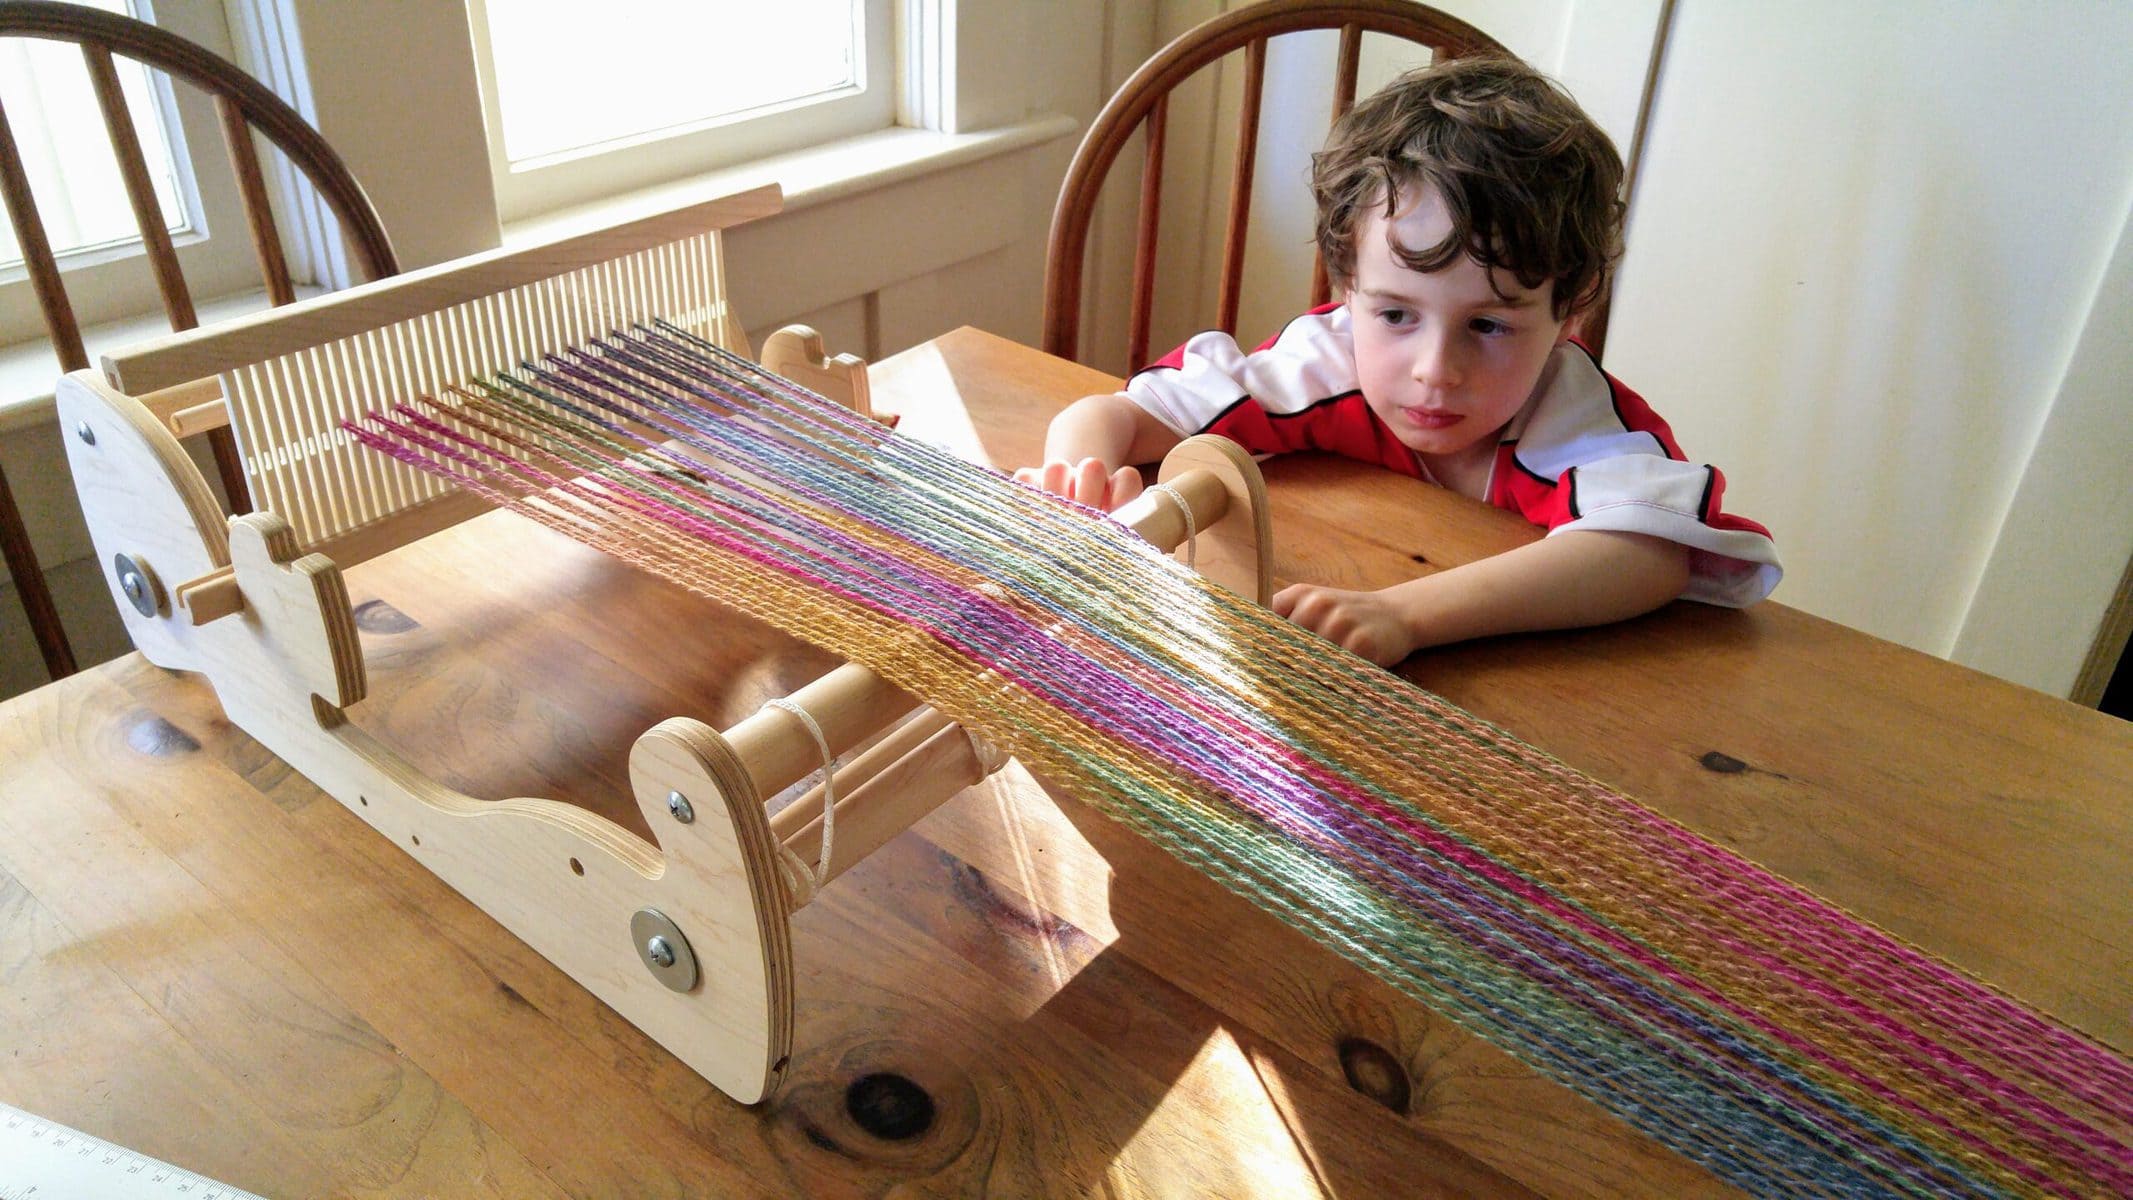 Image description: Small loom with yarn extending out from it, with a young child sitting at the table beside it.